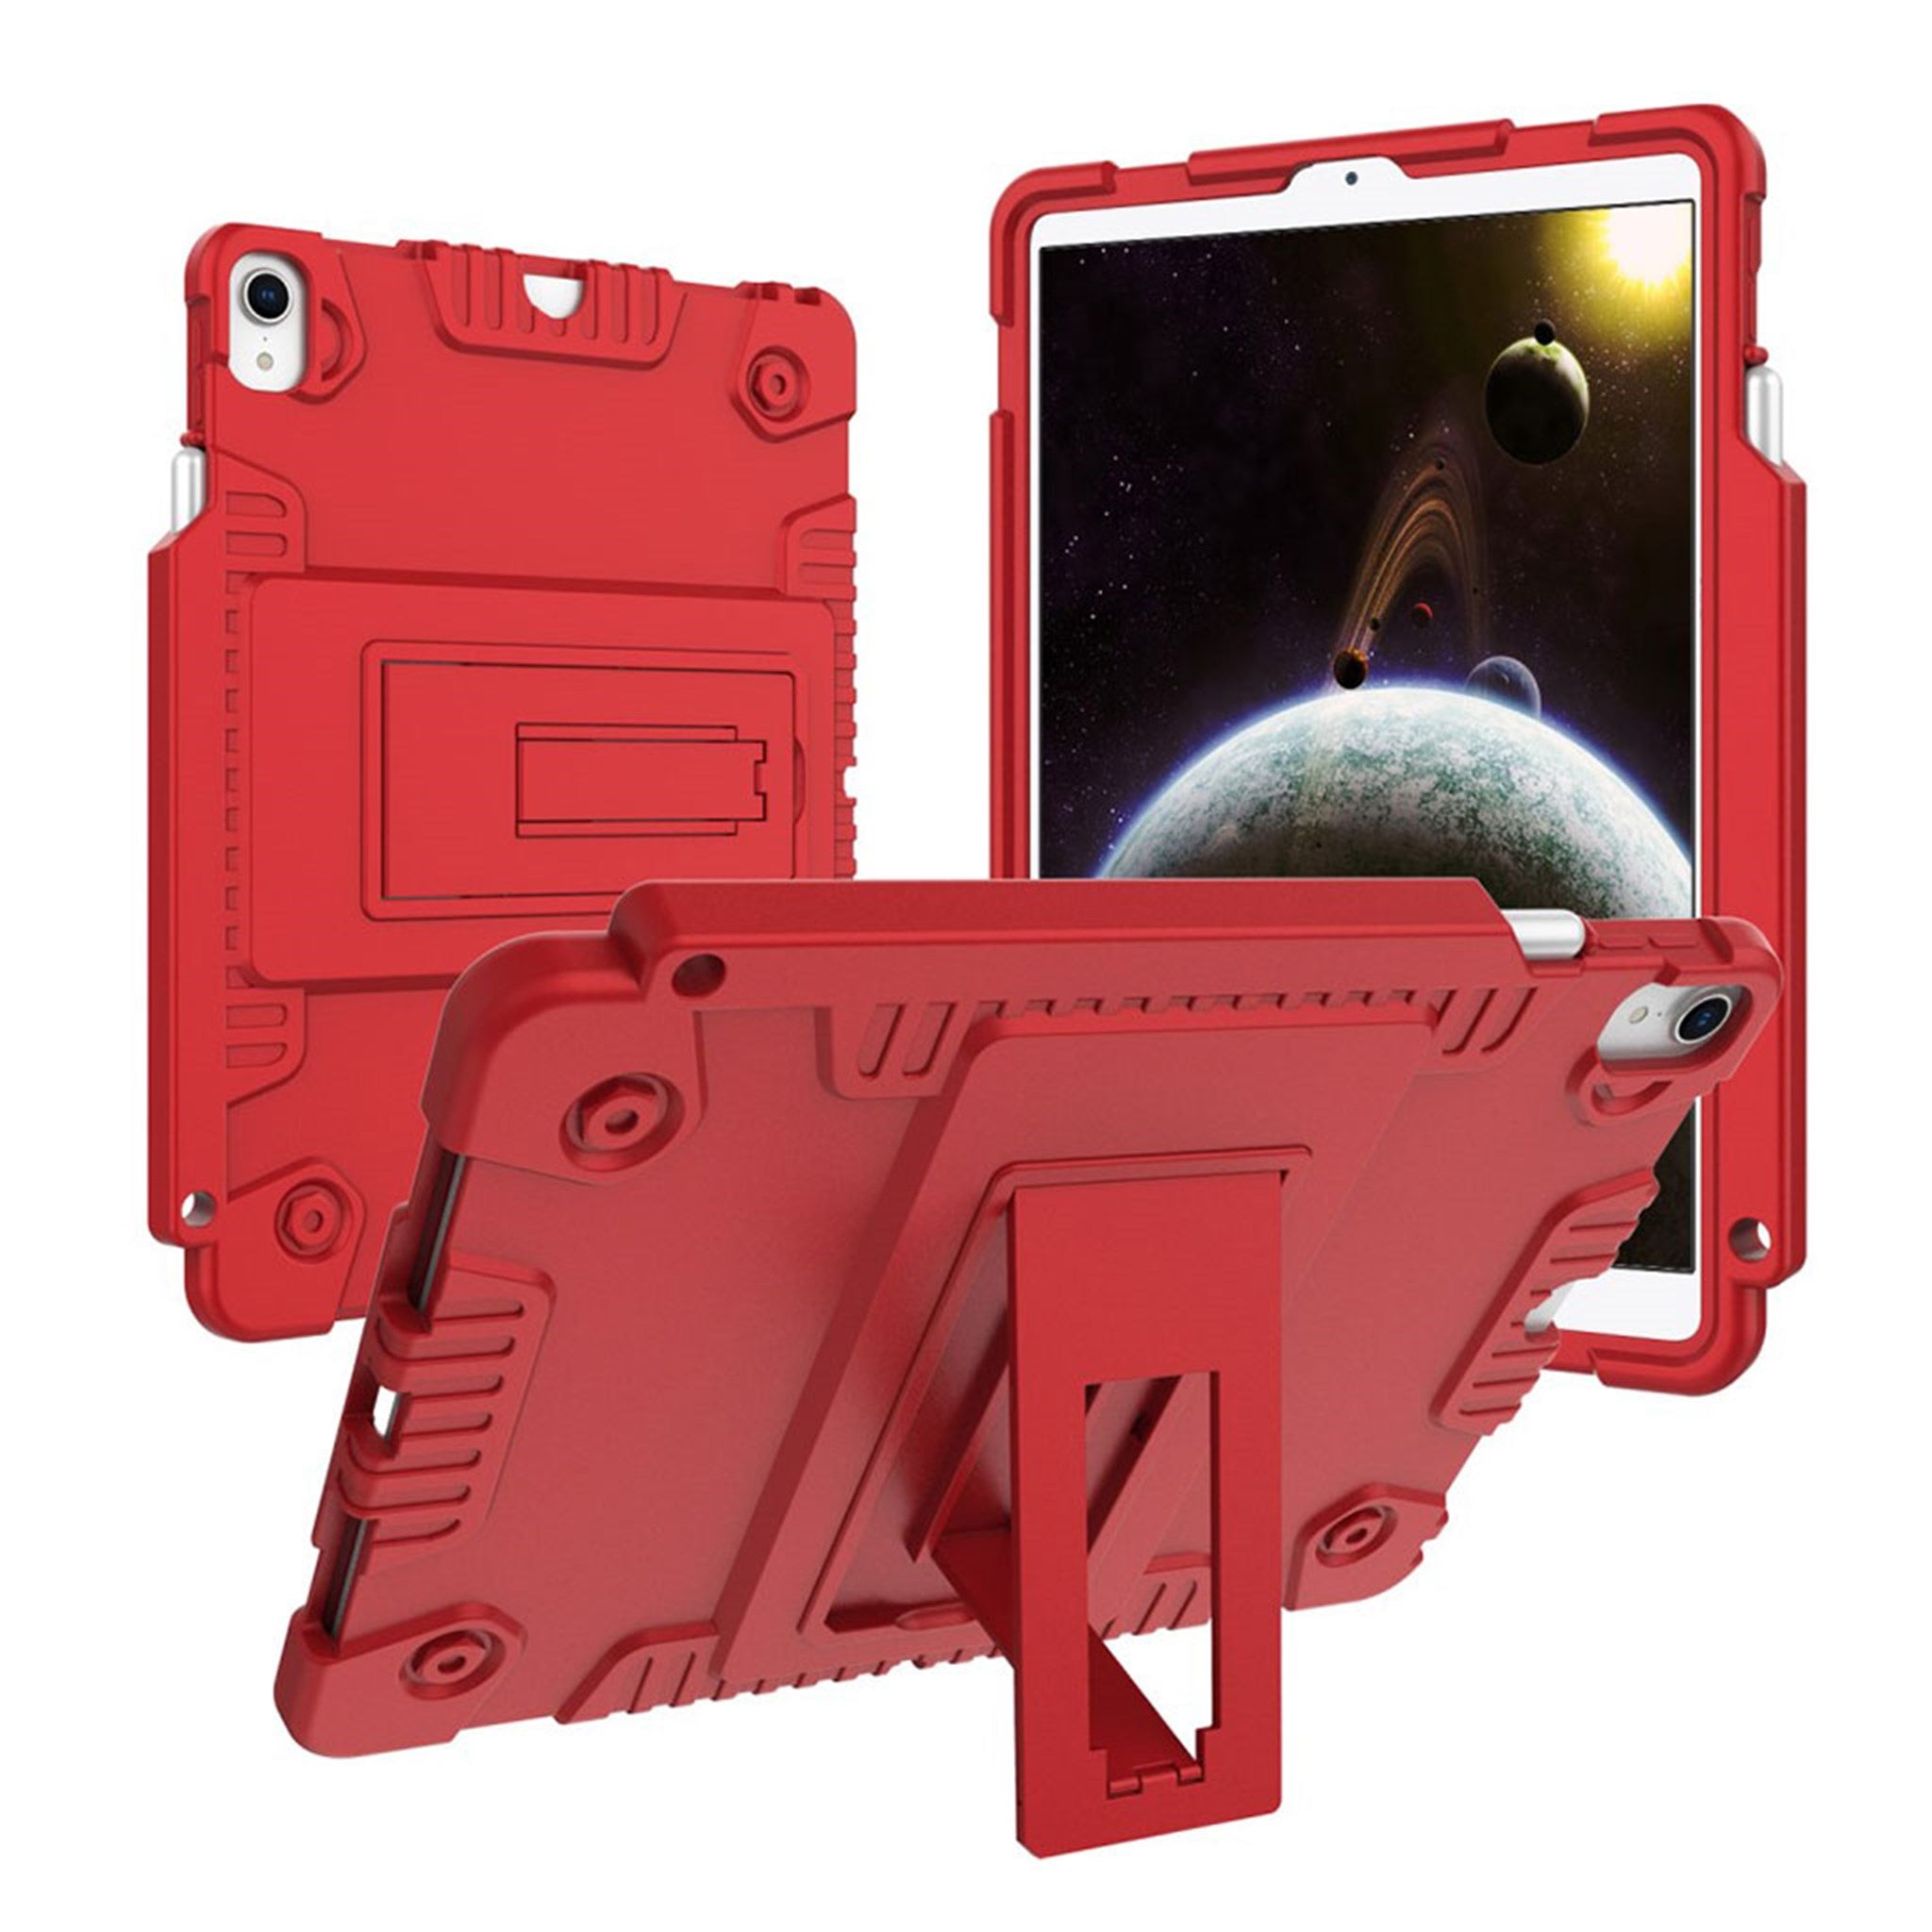 iPad Pro 11 inch (2018) drop-proof case - Red